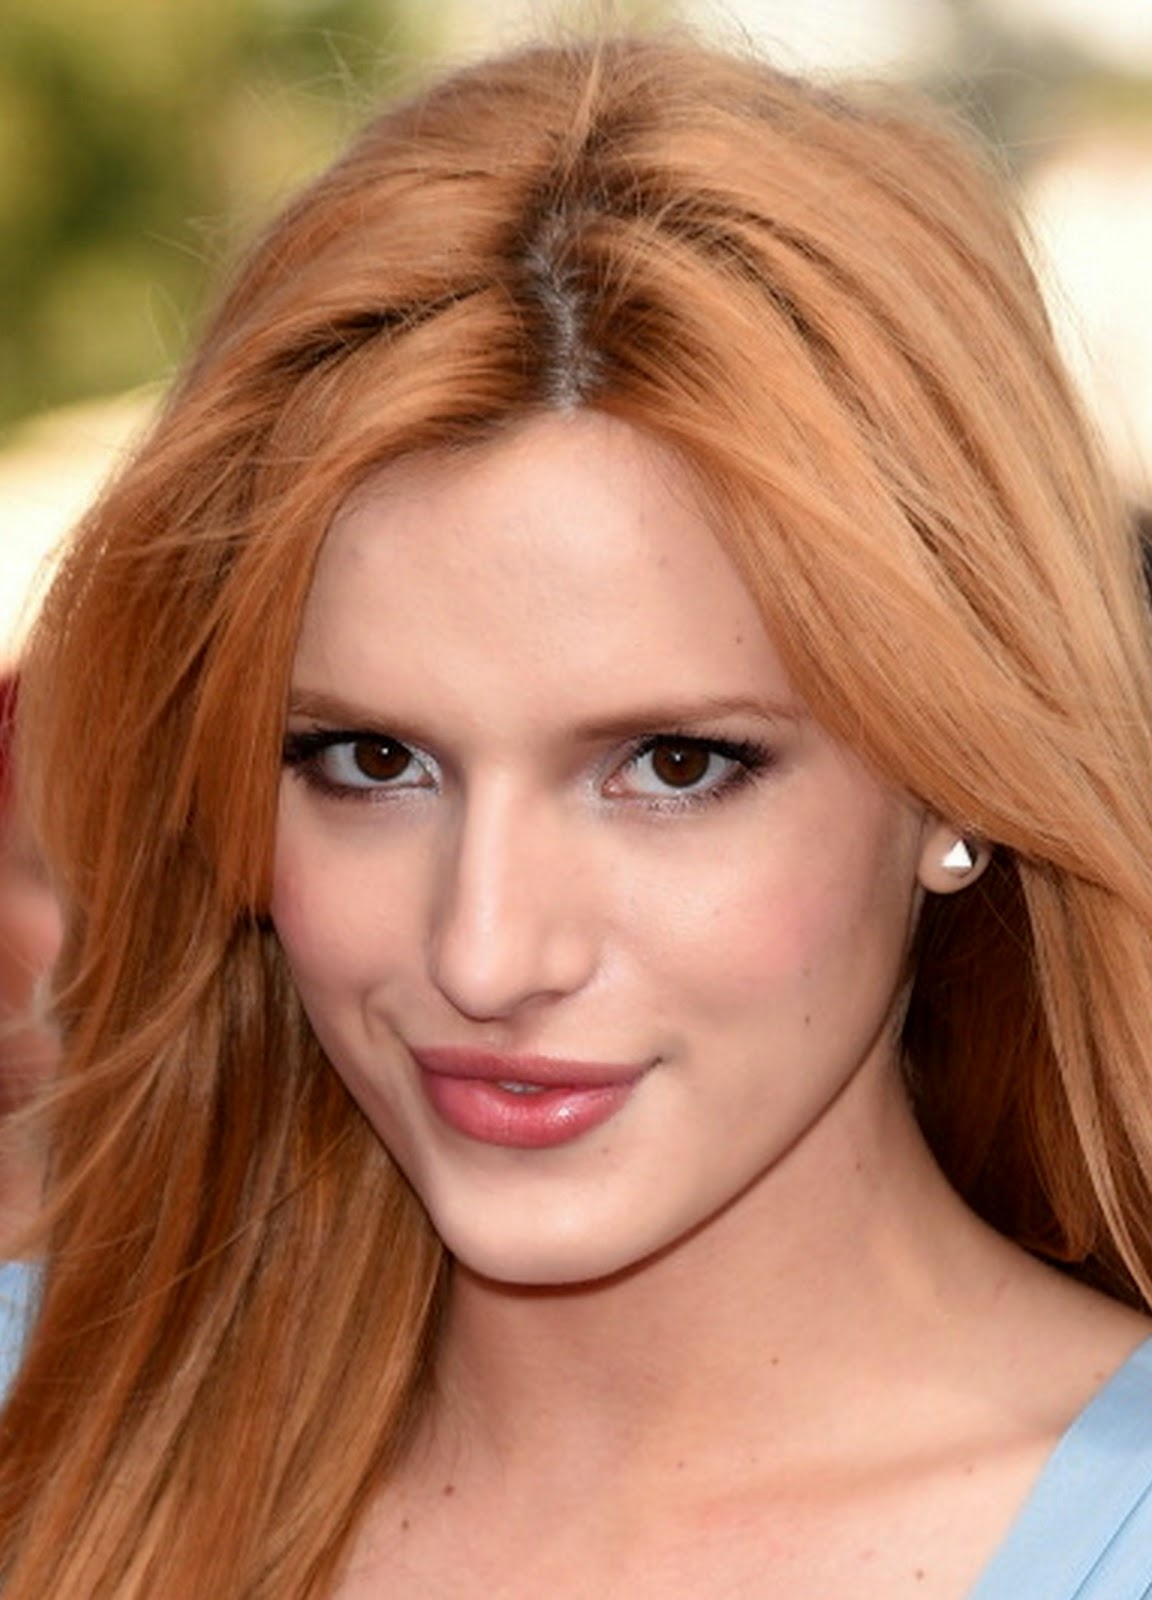 Bella Thorne Anal Blowjob - Bella Thorne Leaked Private Nude Photo Hacked Â» Nude Couples ...